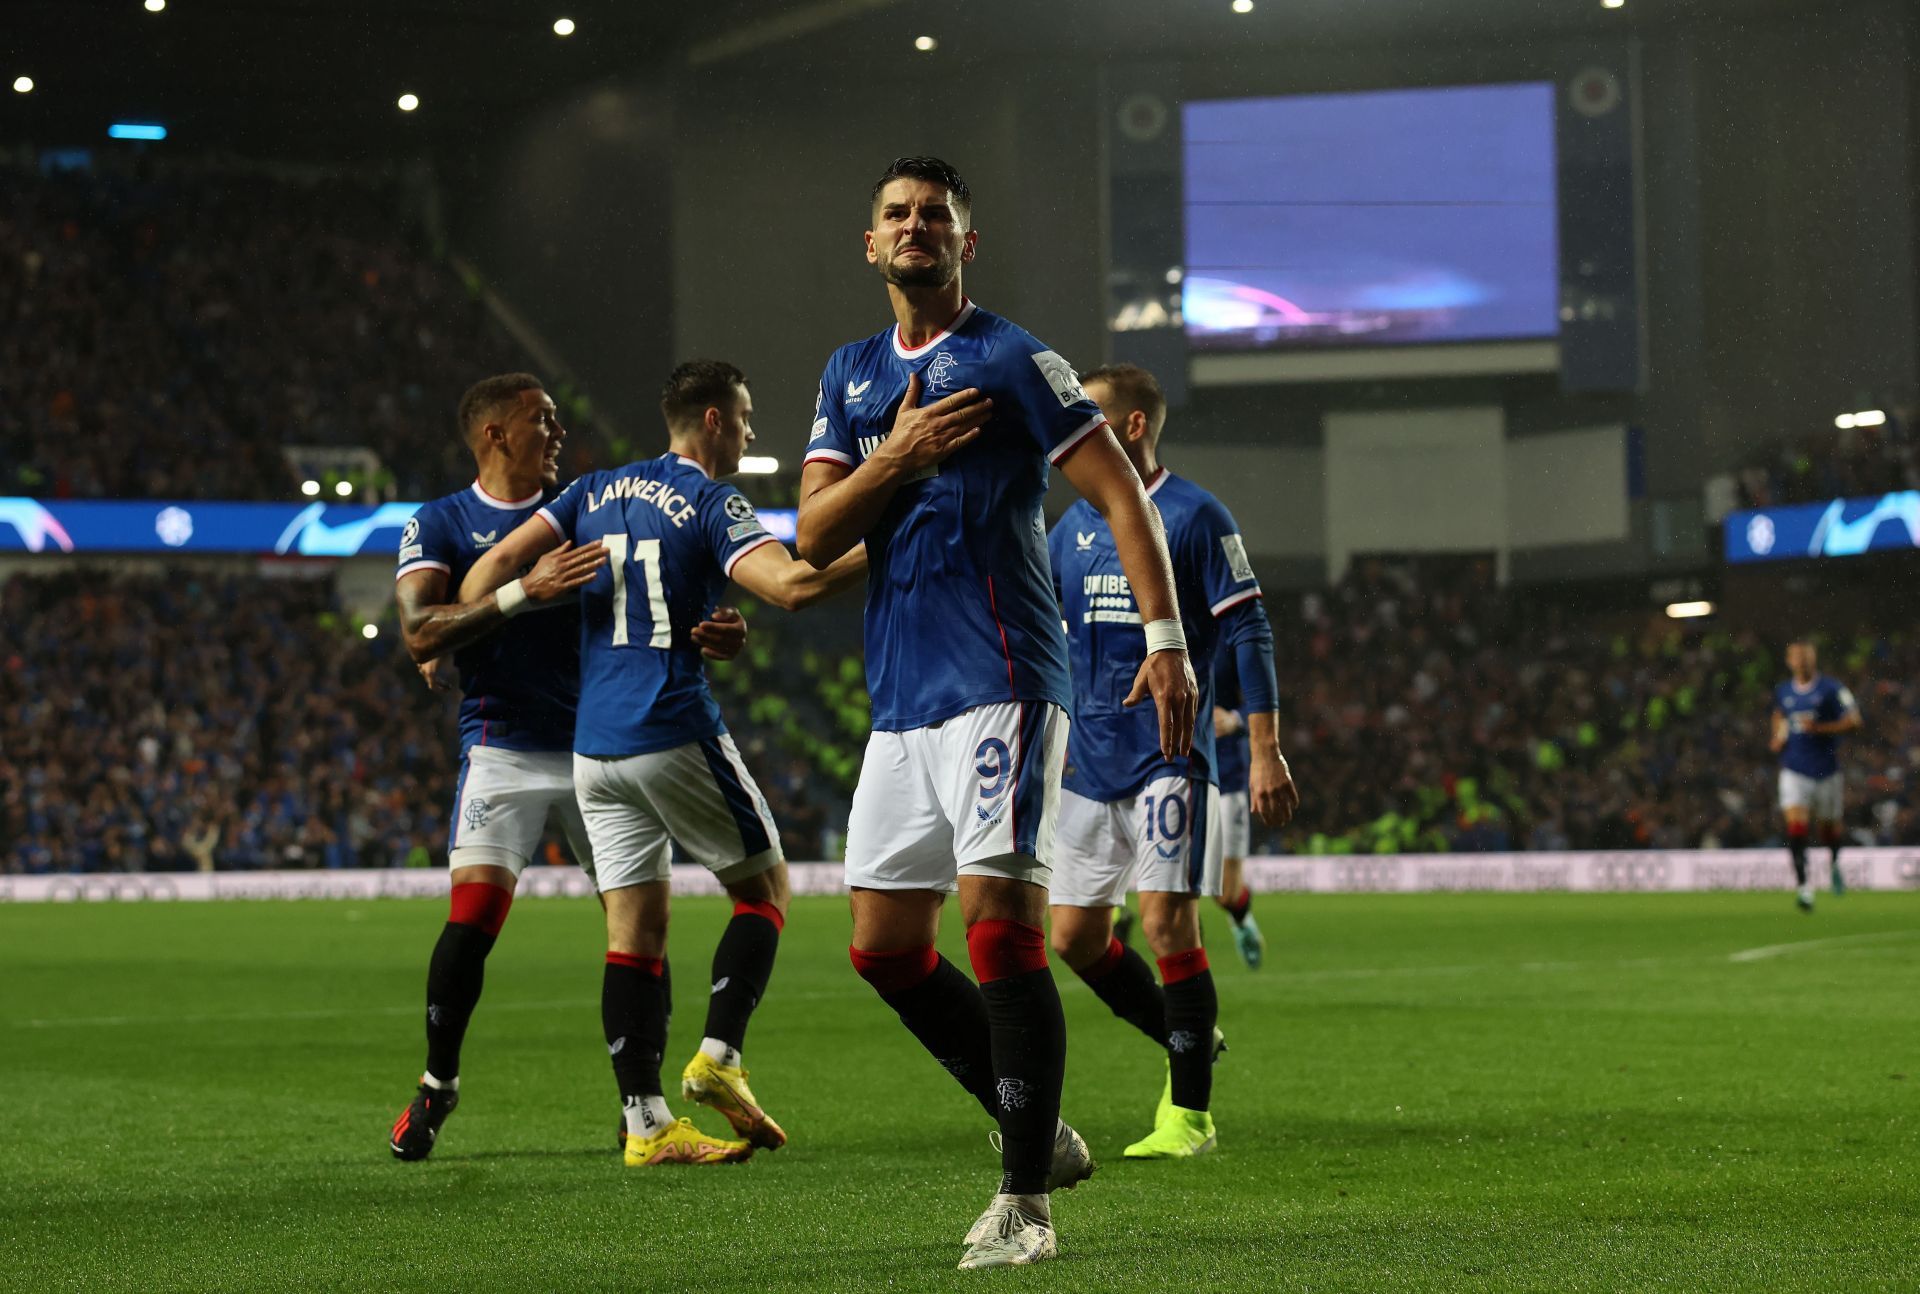 Glasgow Rangers v PSV Eindhoven - UEFA Champions League Play-Off First Leg